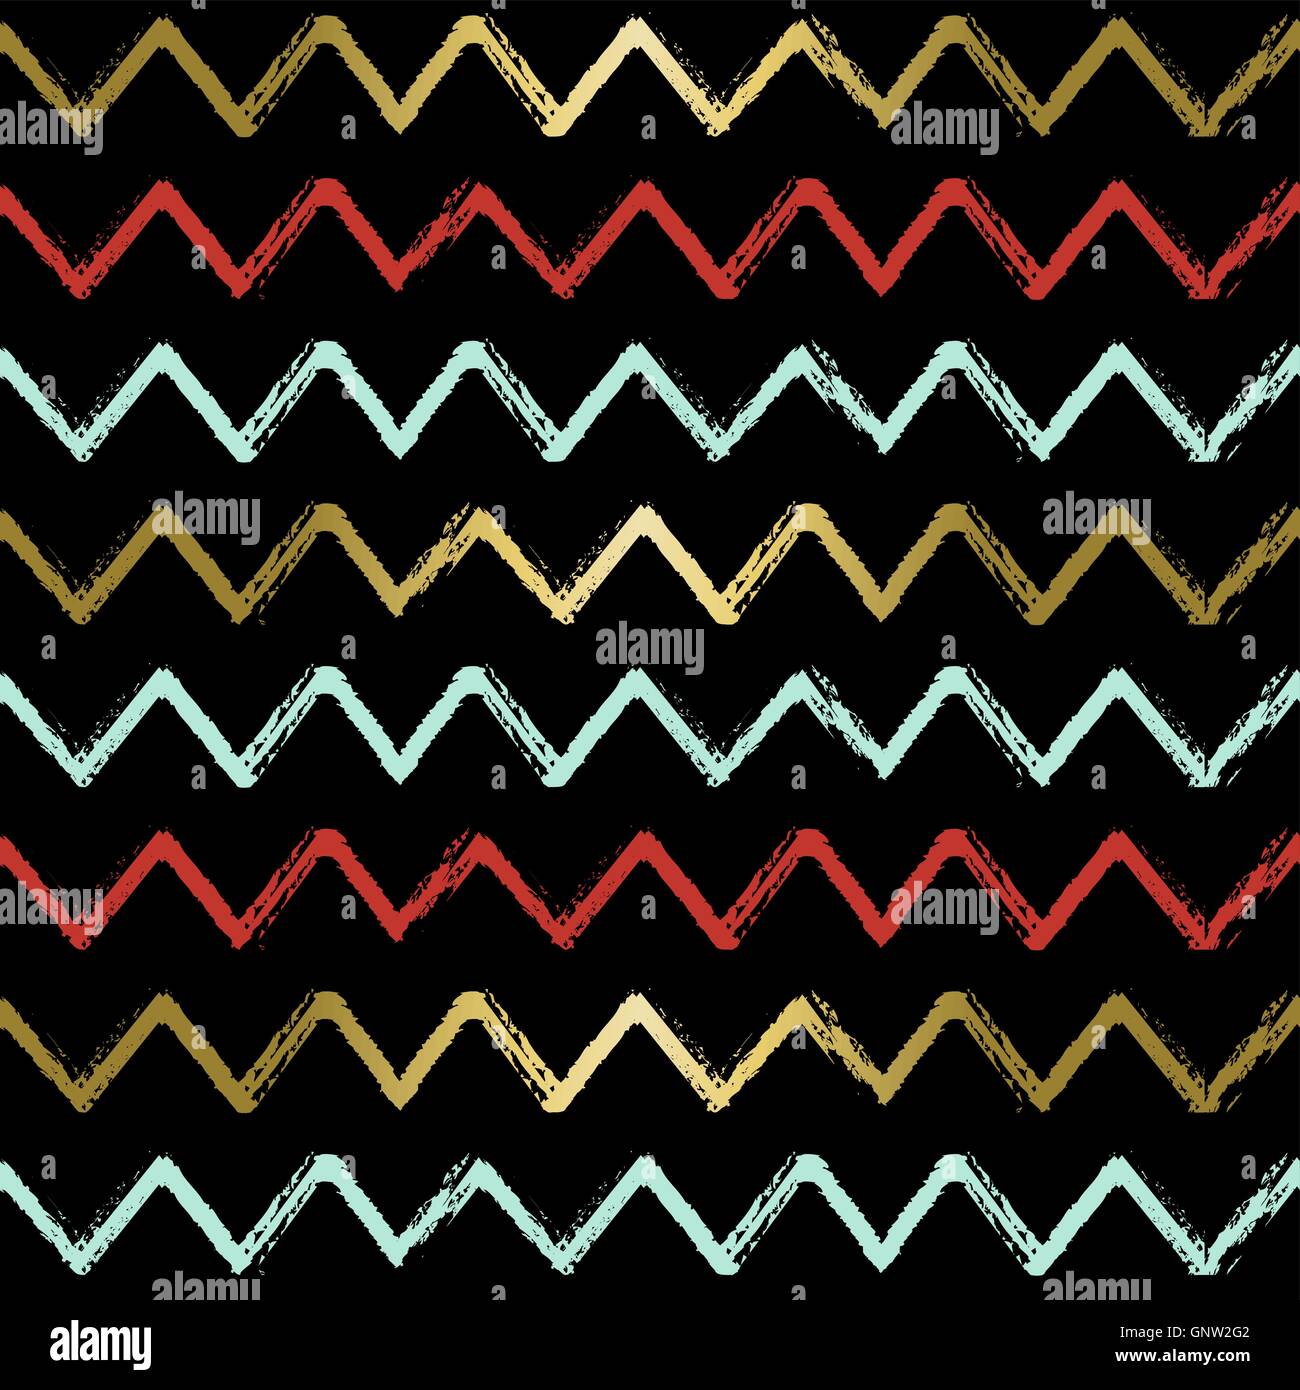 Zig zag seamless pattern, chevron lines in grunge hand drawn style with gold and festive colors ideal for christmas season. EPS1 Stock Vector